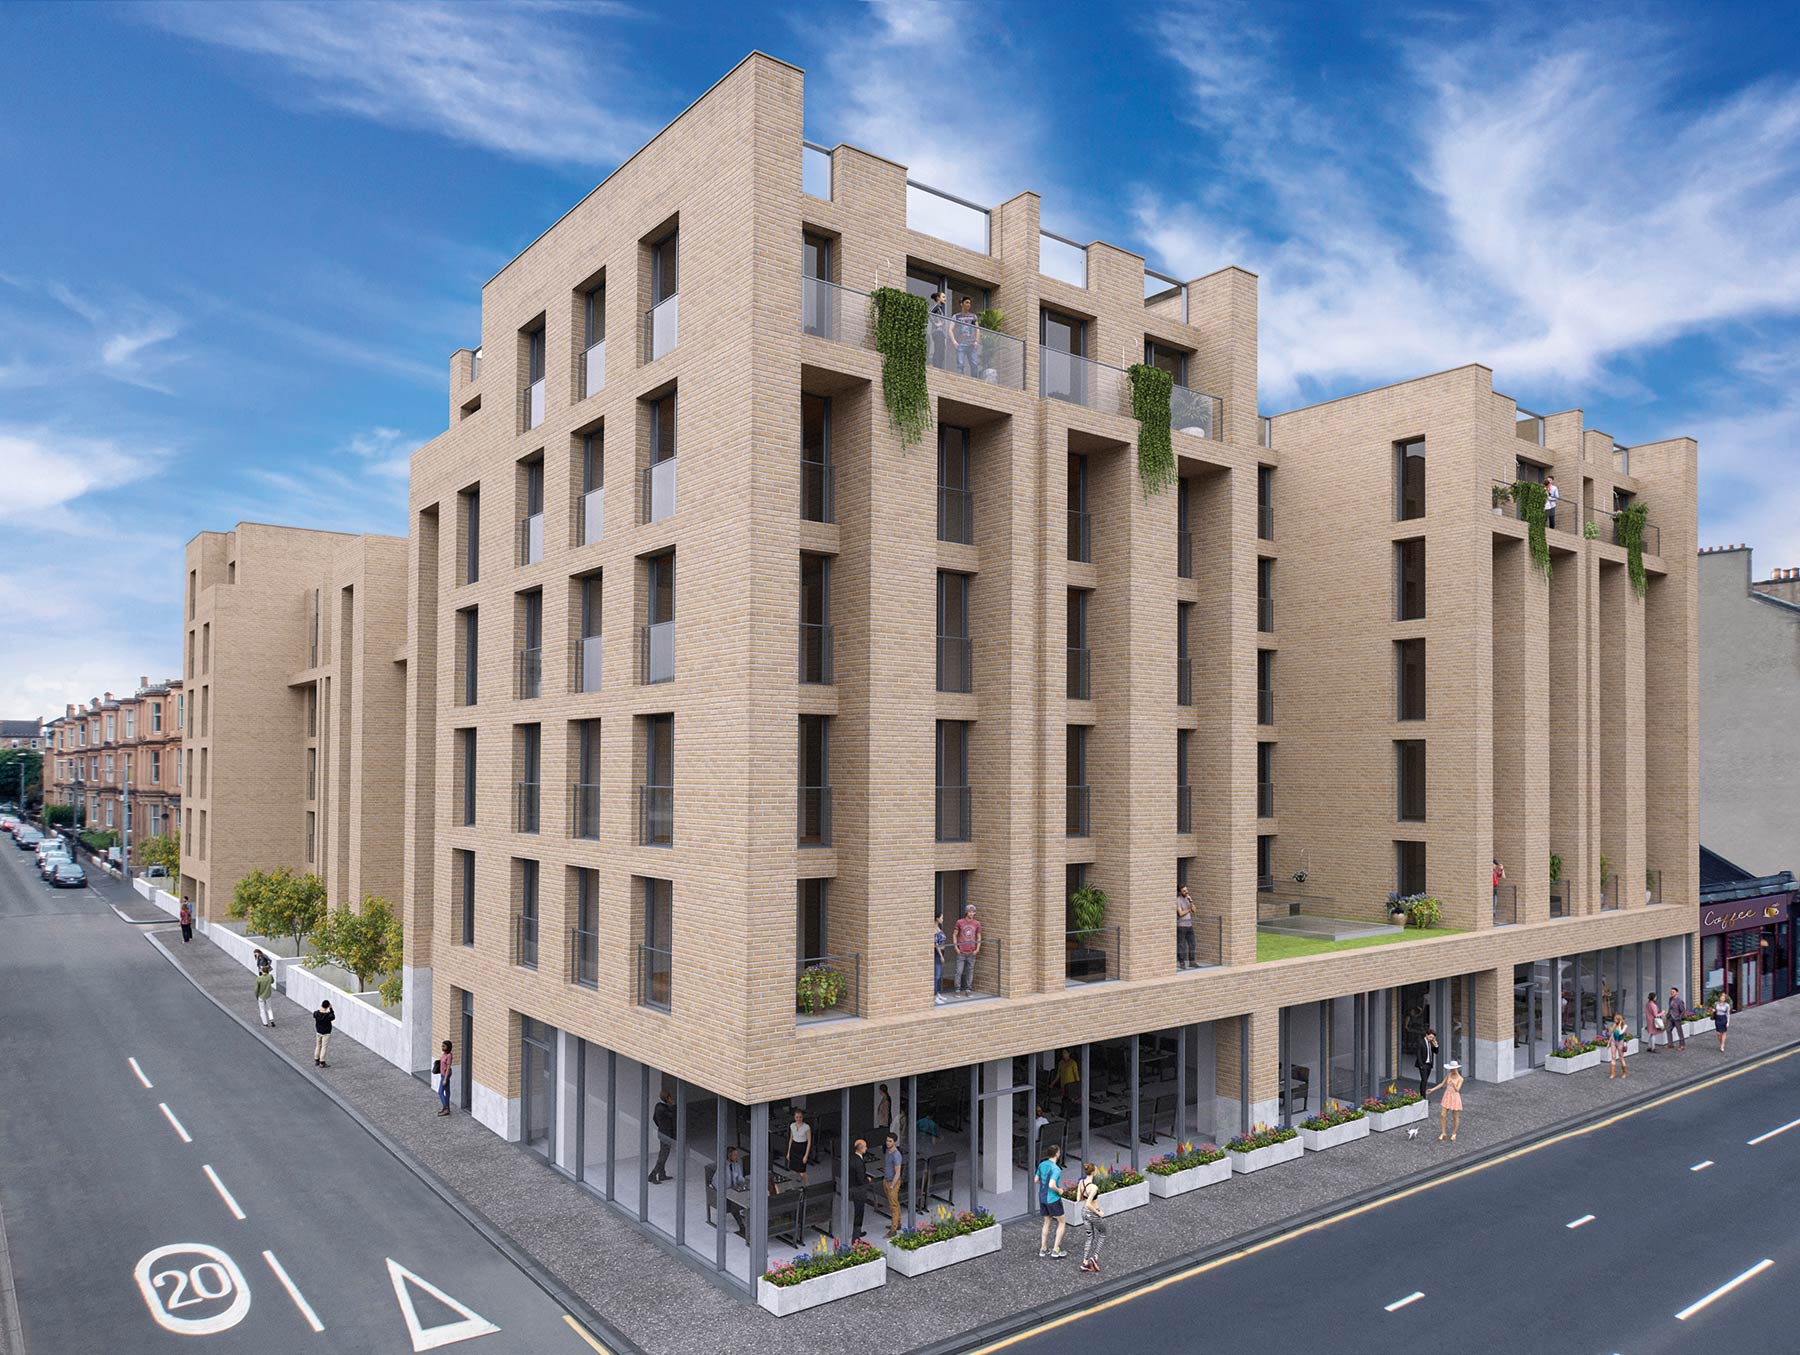 Student accommodation proposal to replace consented Glasgow city centre development